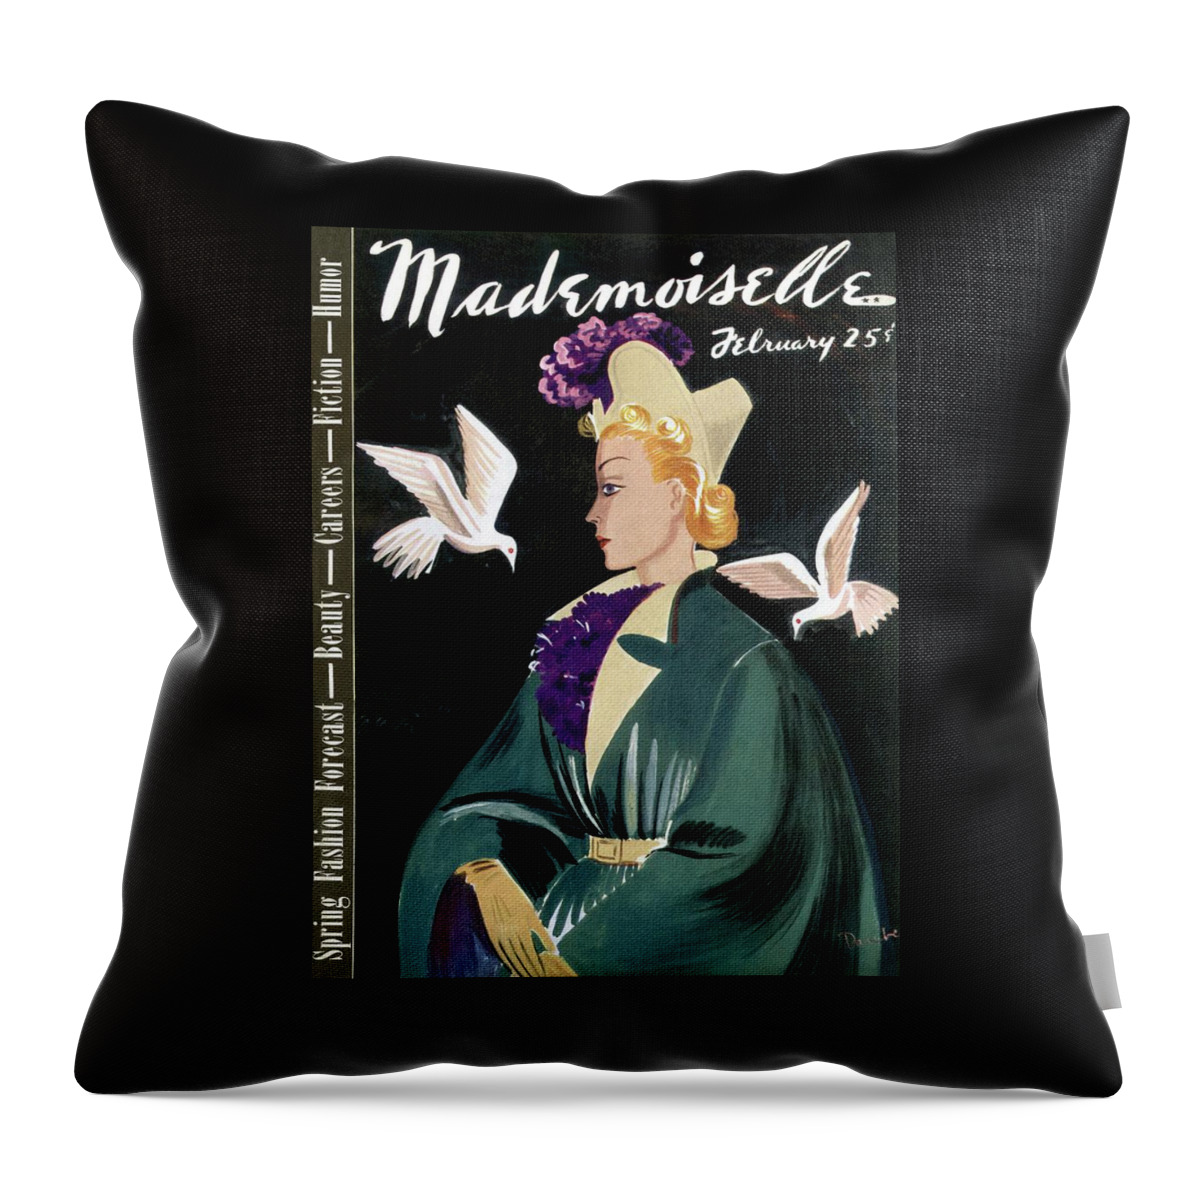 Mademoiselle Cover Featuring A Model In A Green Throw Pillow